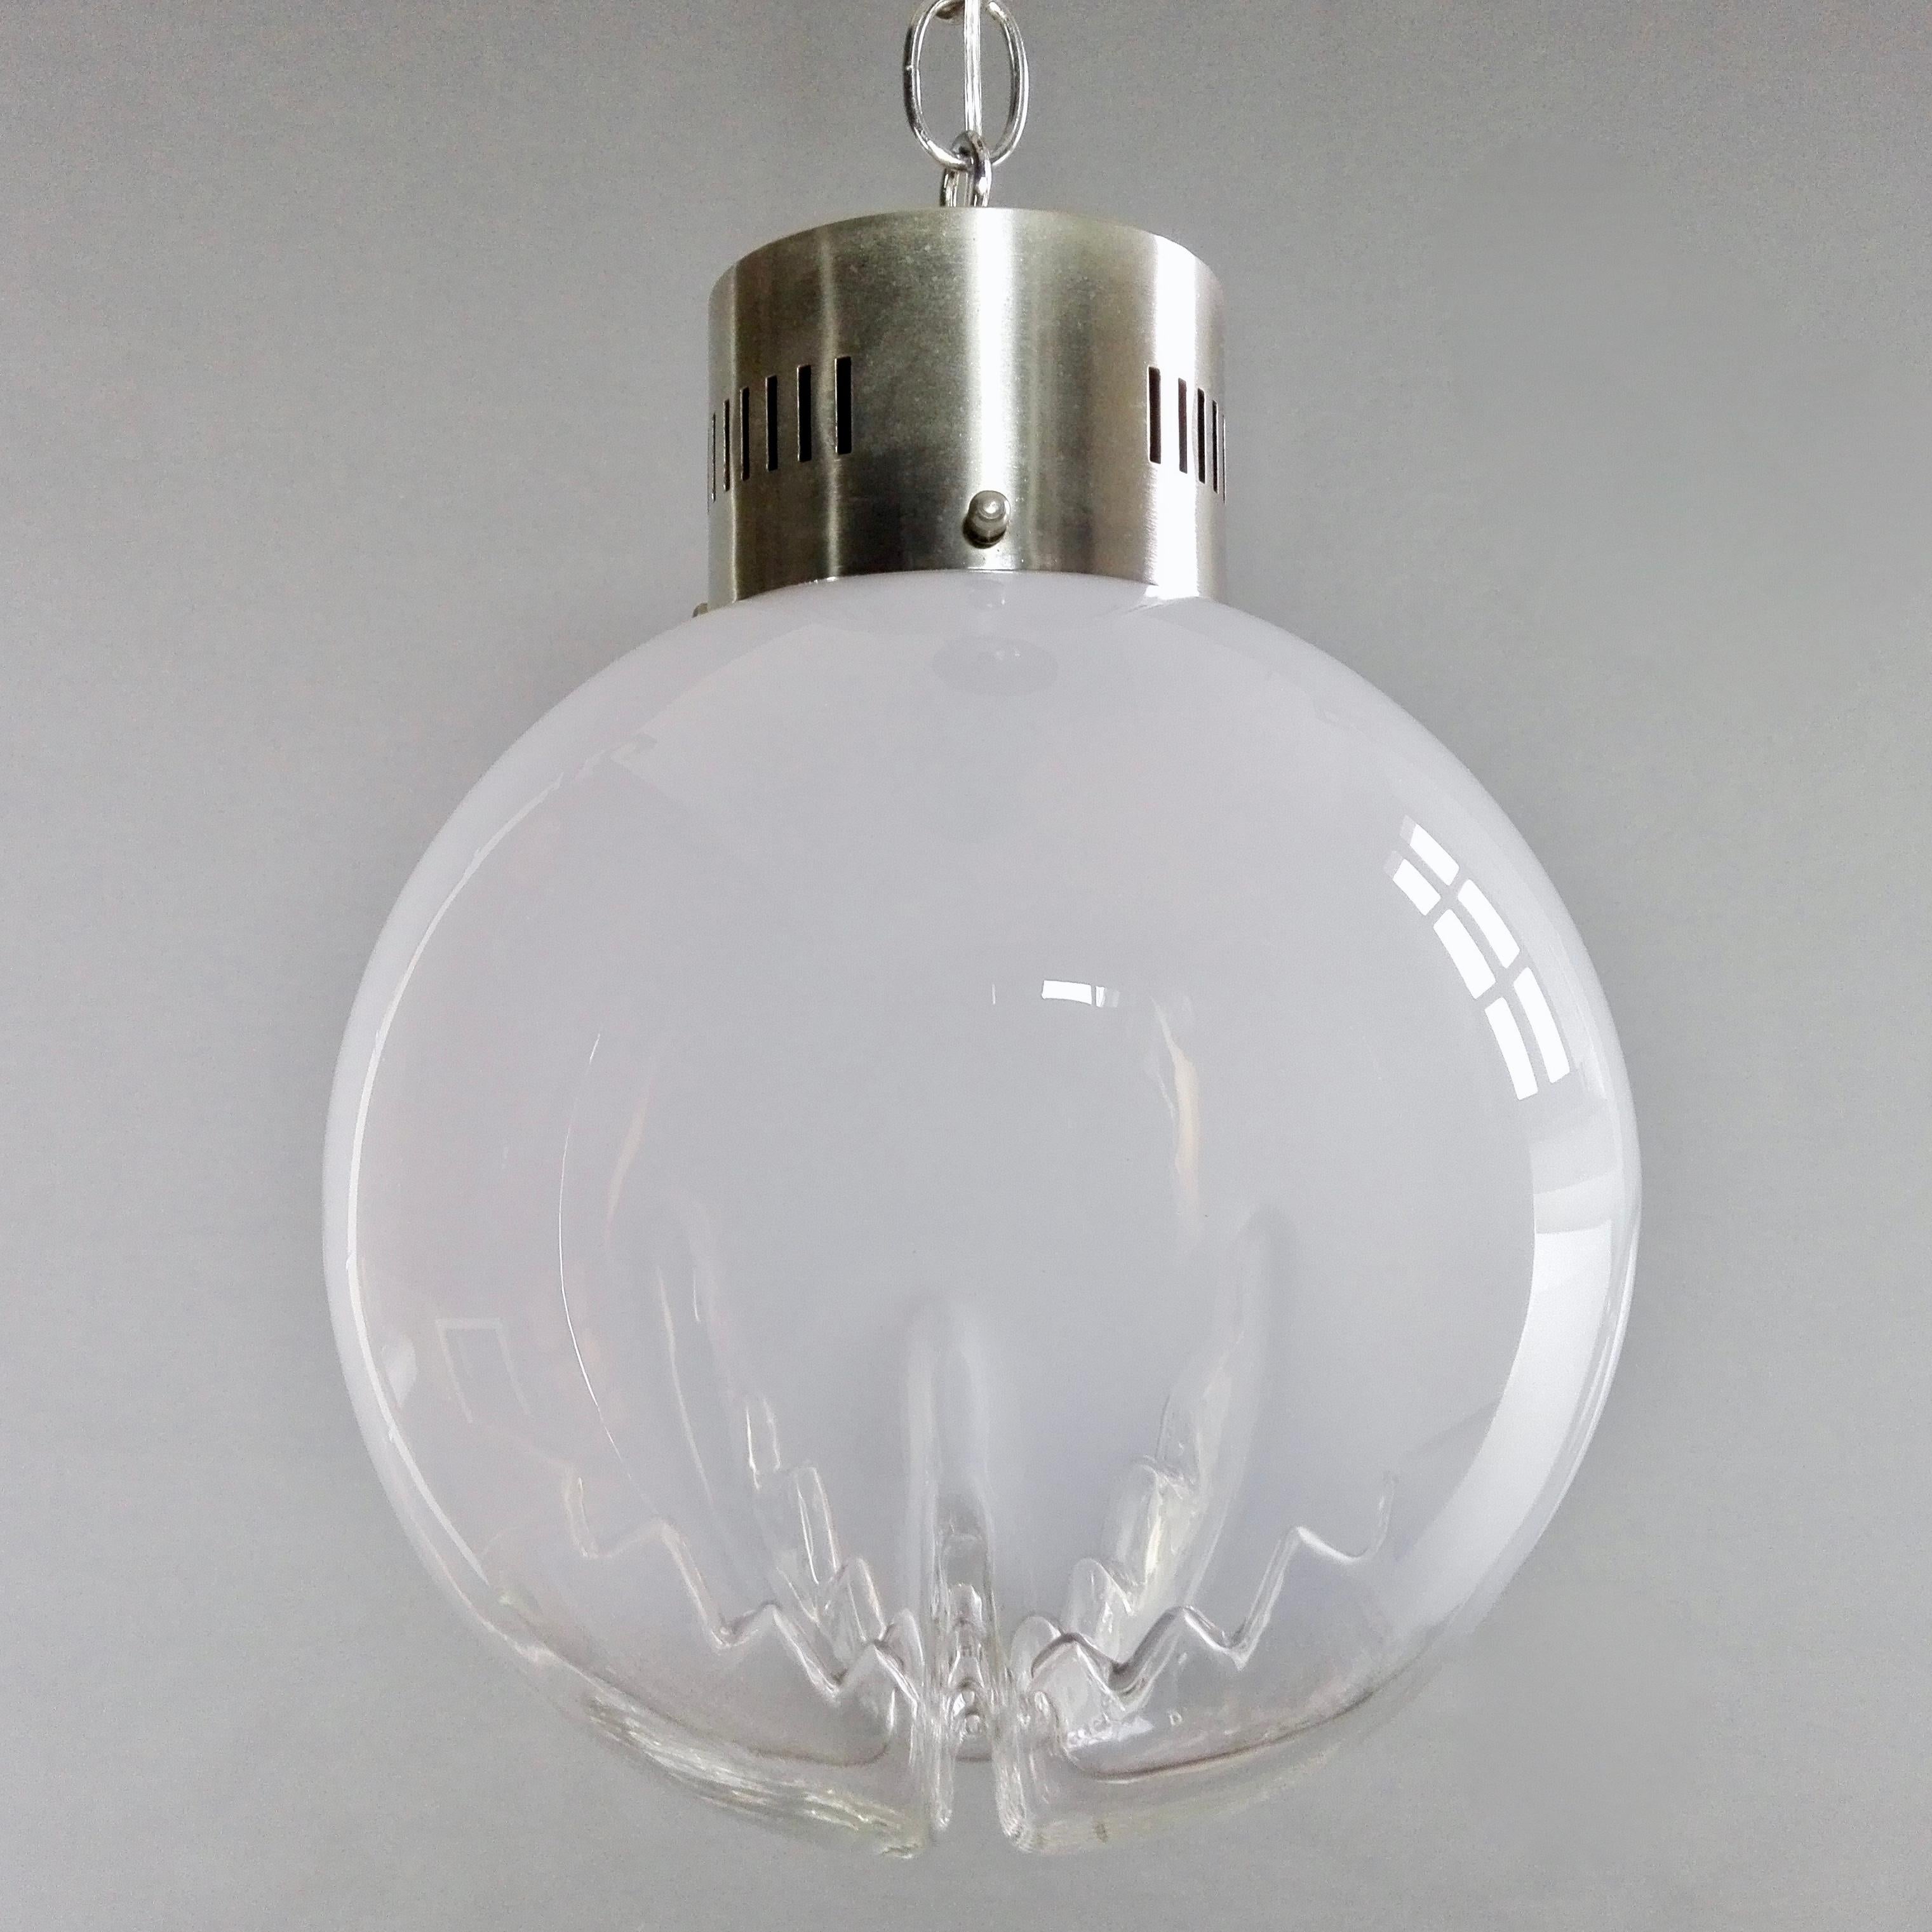 Italian 1970s Mazzega Murano attributed hand-blown clear and milky glass pendant lamp. 